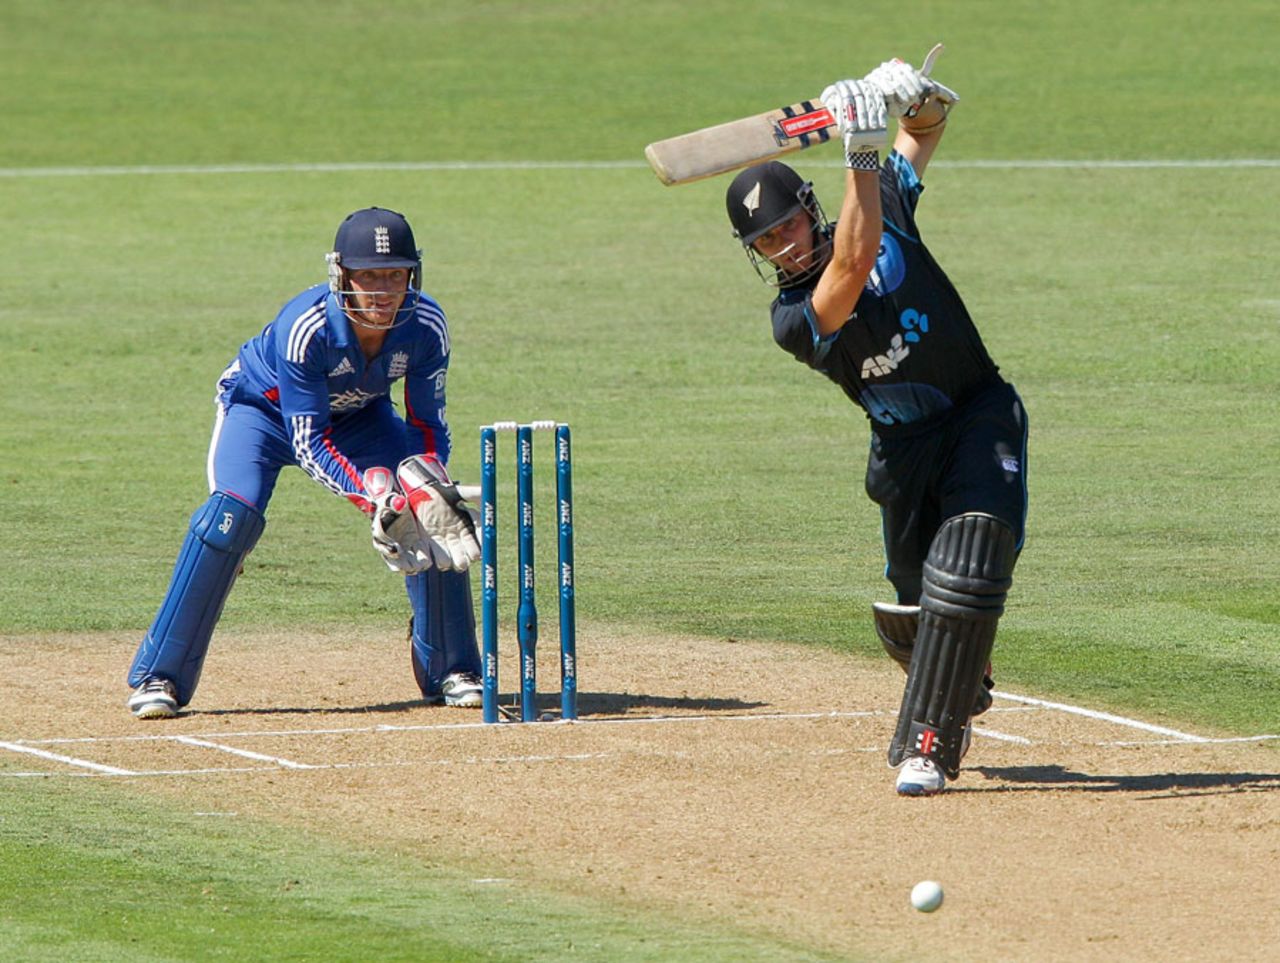 Kane Williamson drives during his innings of 33, New Zealand v England, 2nd ODI, Napier, February 20, 2013